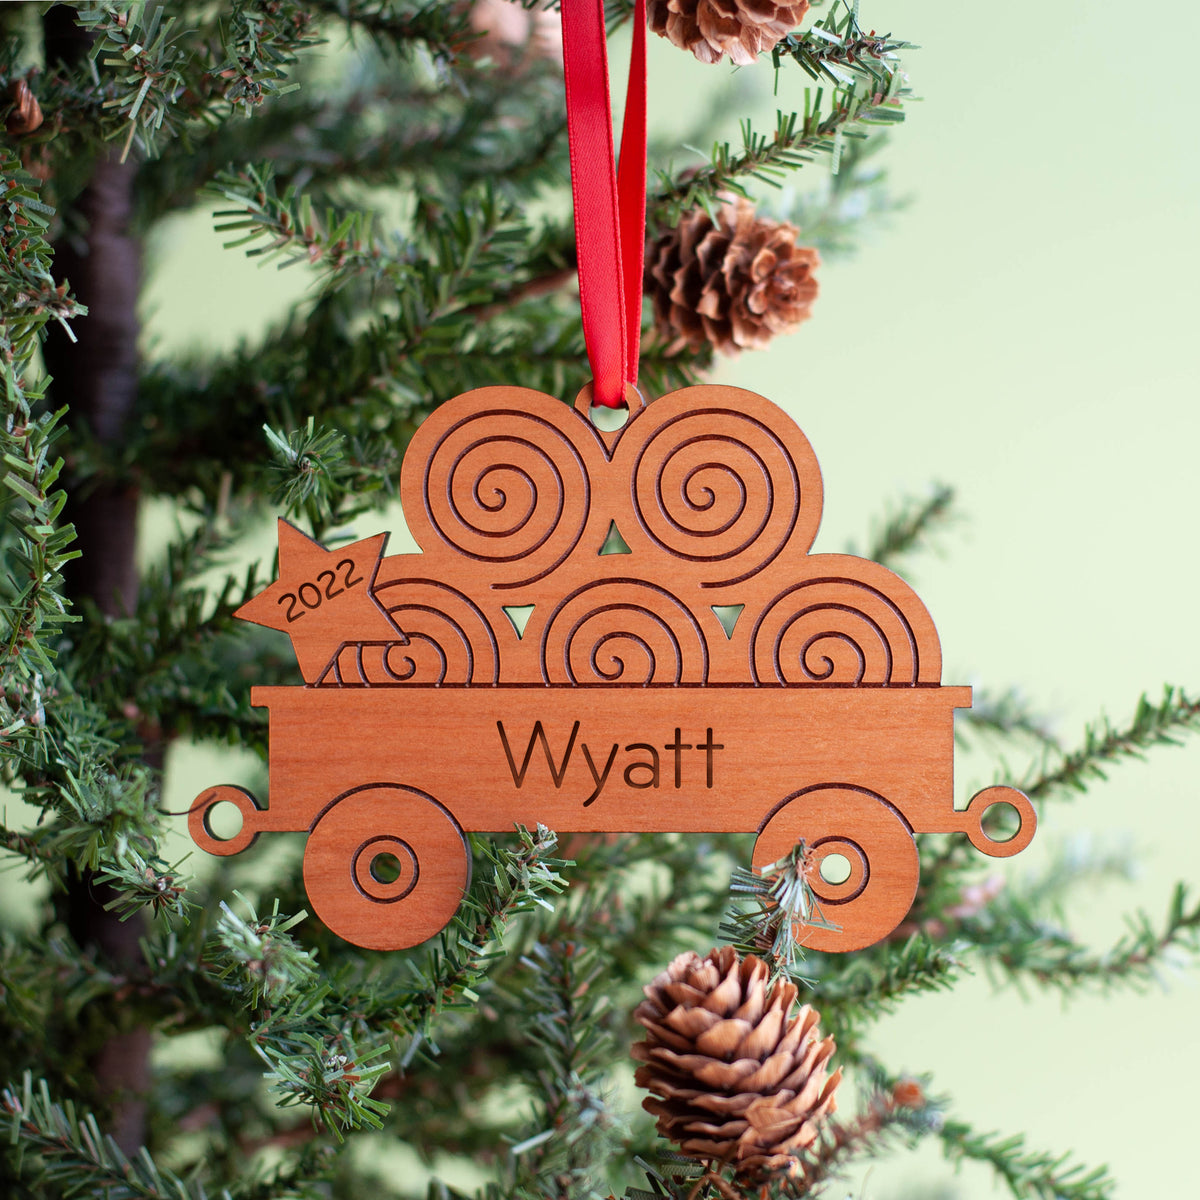 Tractor Wooden Christmas Ornament - Personalized Hay Wagon